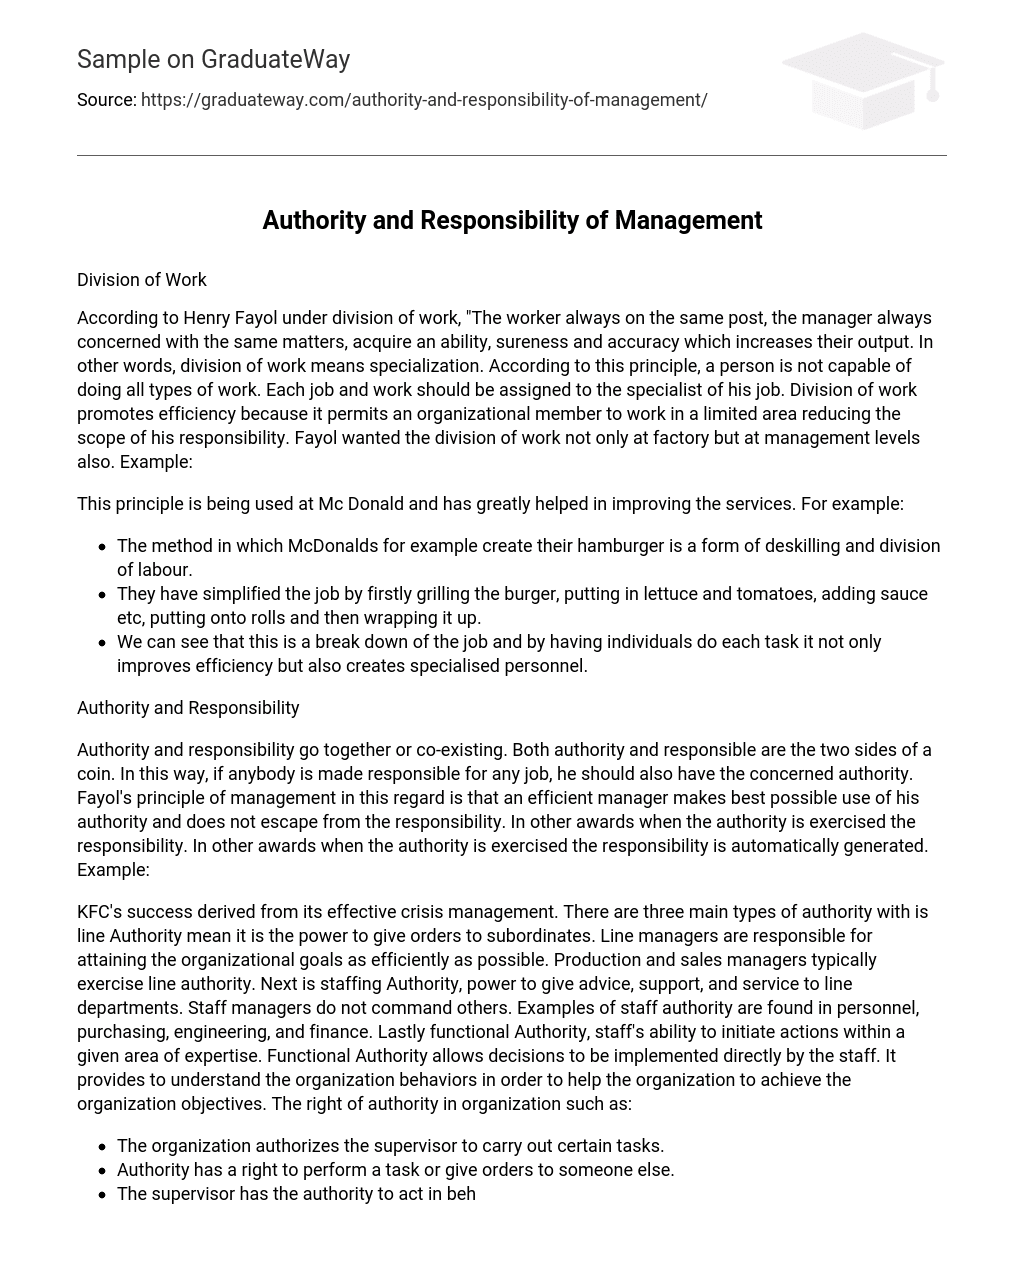 Authority and Responsibility of Management